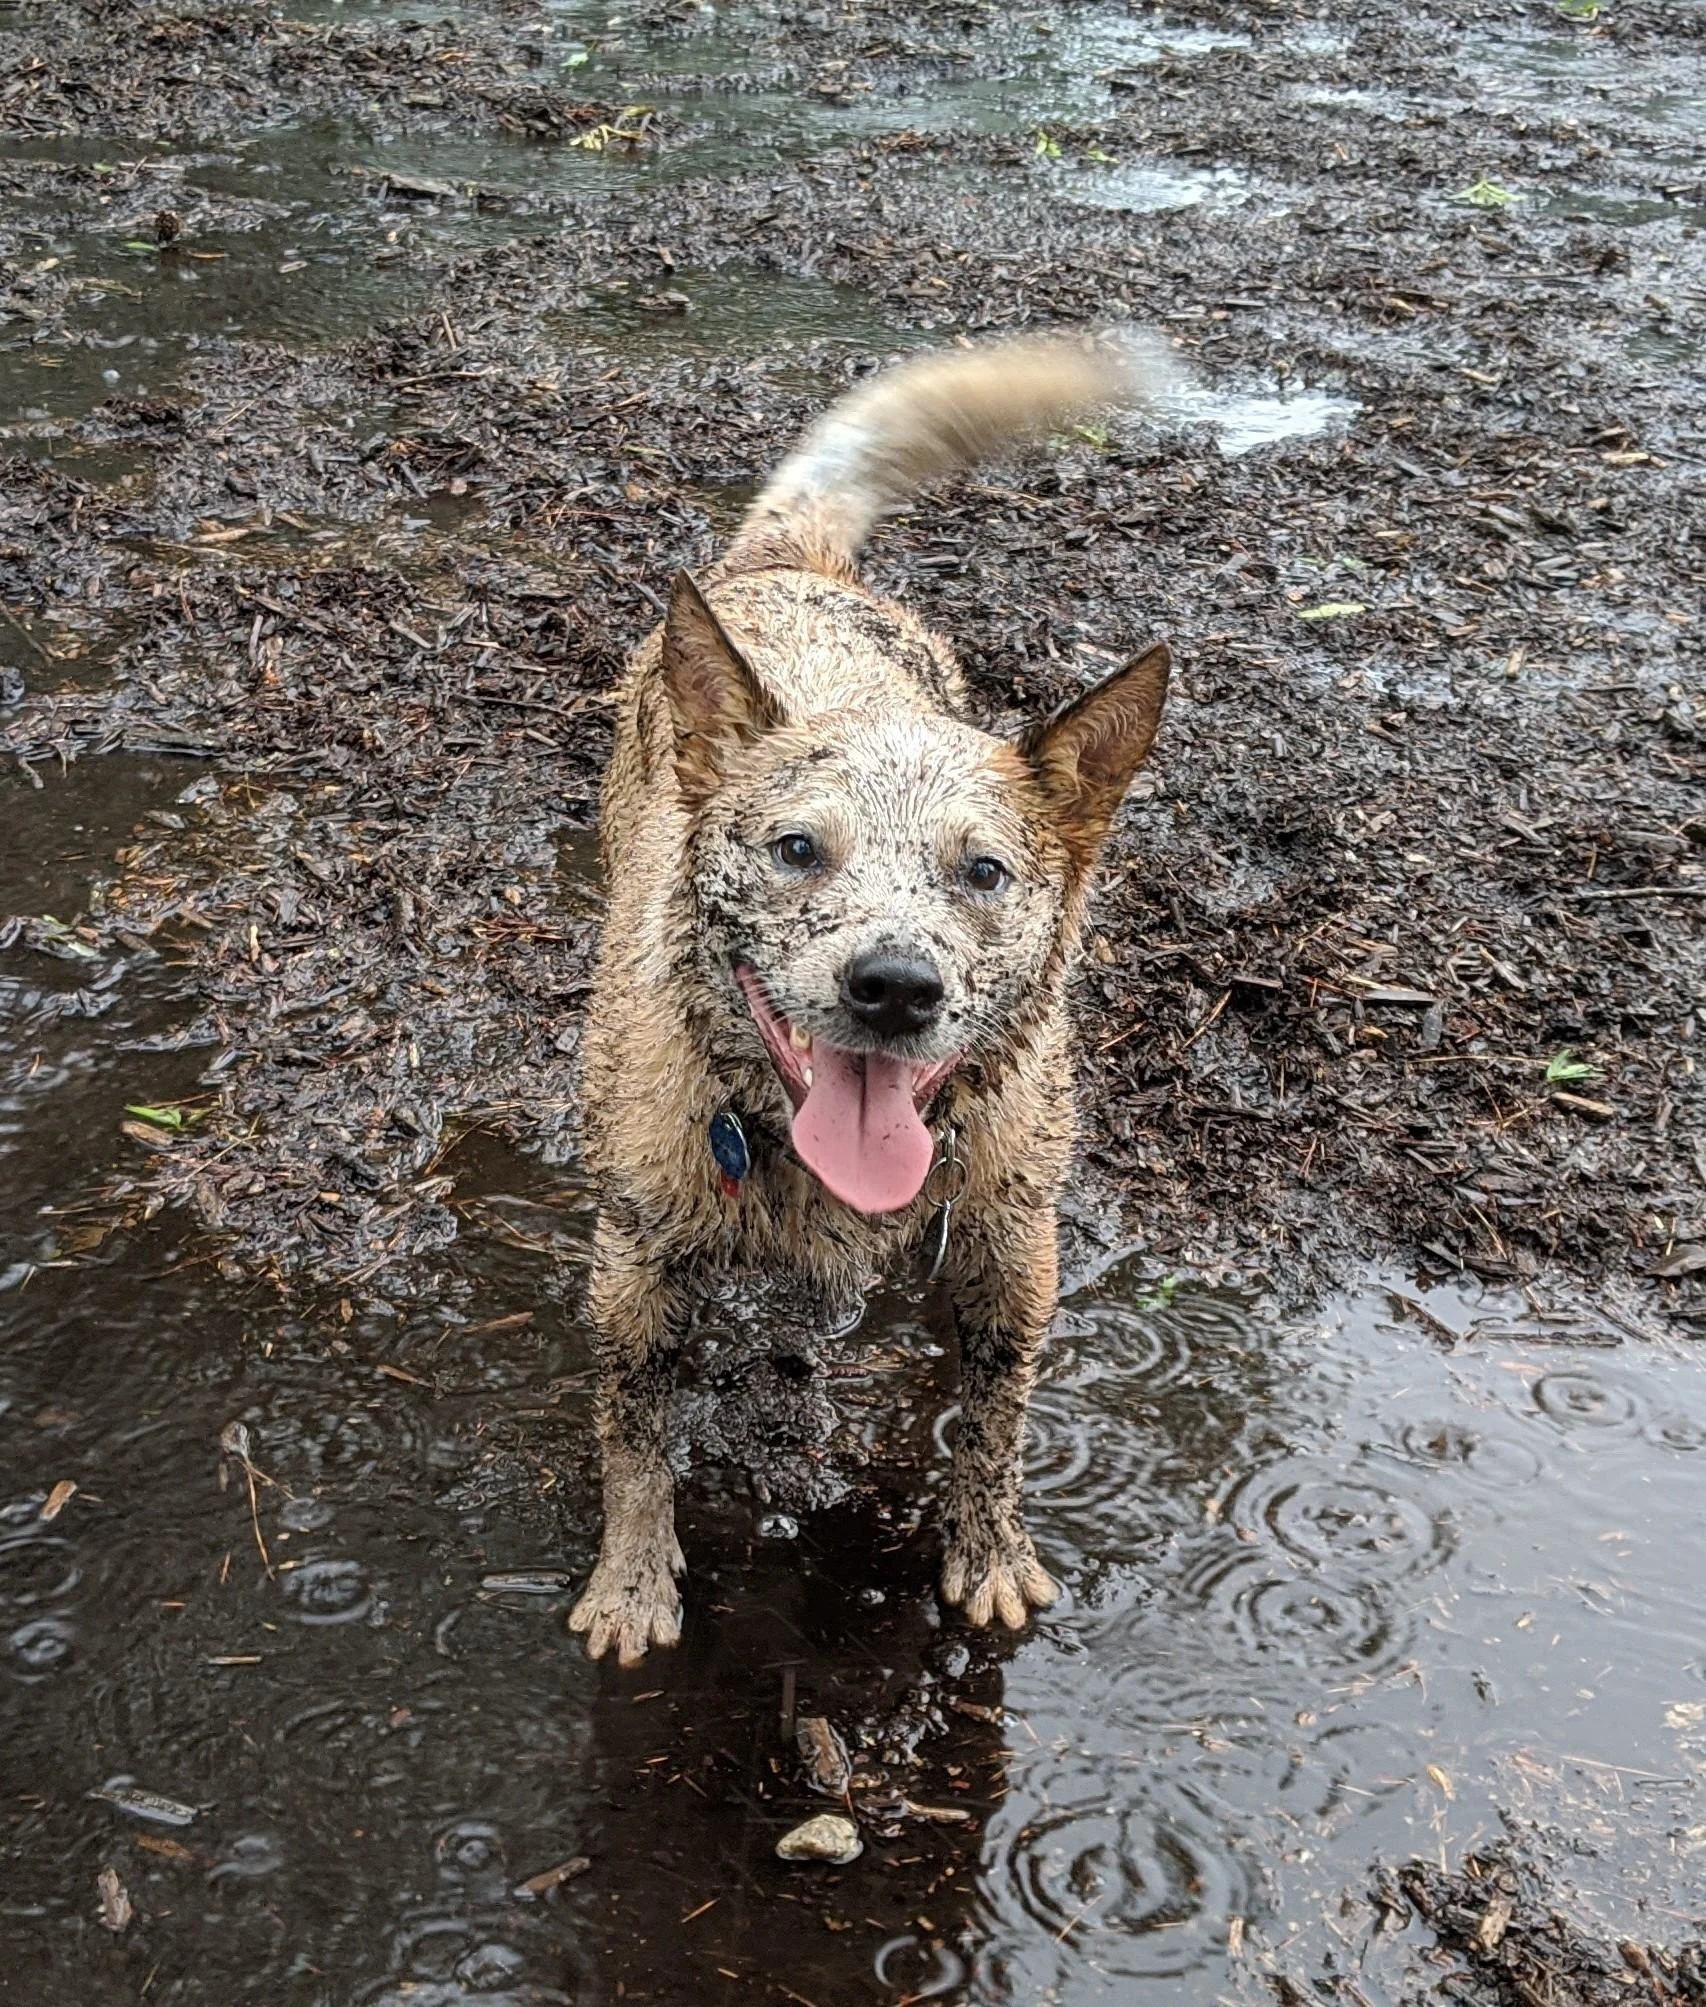 Fox like looking dog with pointy ears wagging tail and playing in muddy rain puddles